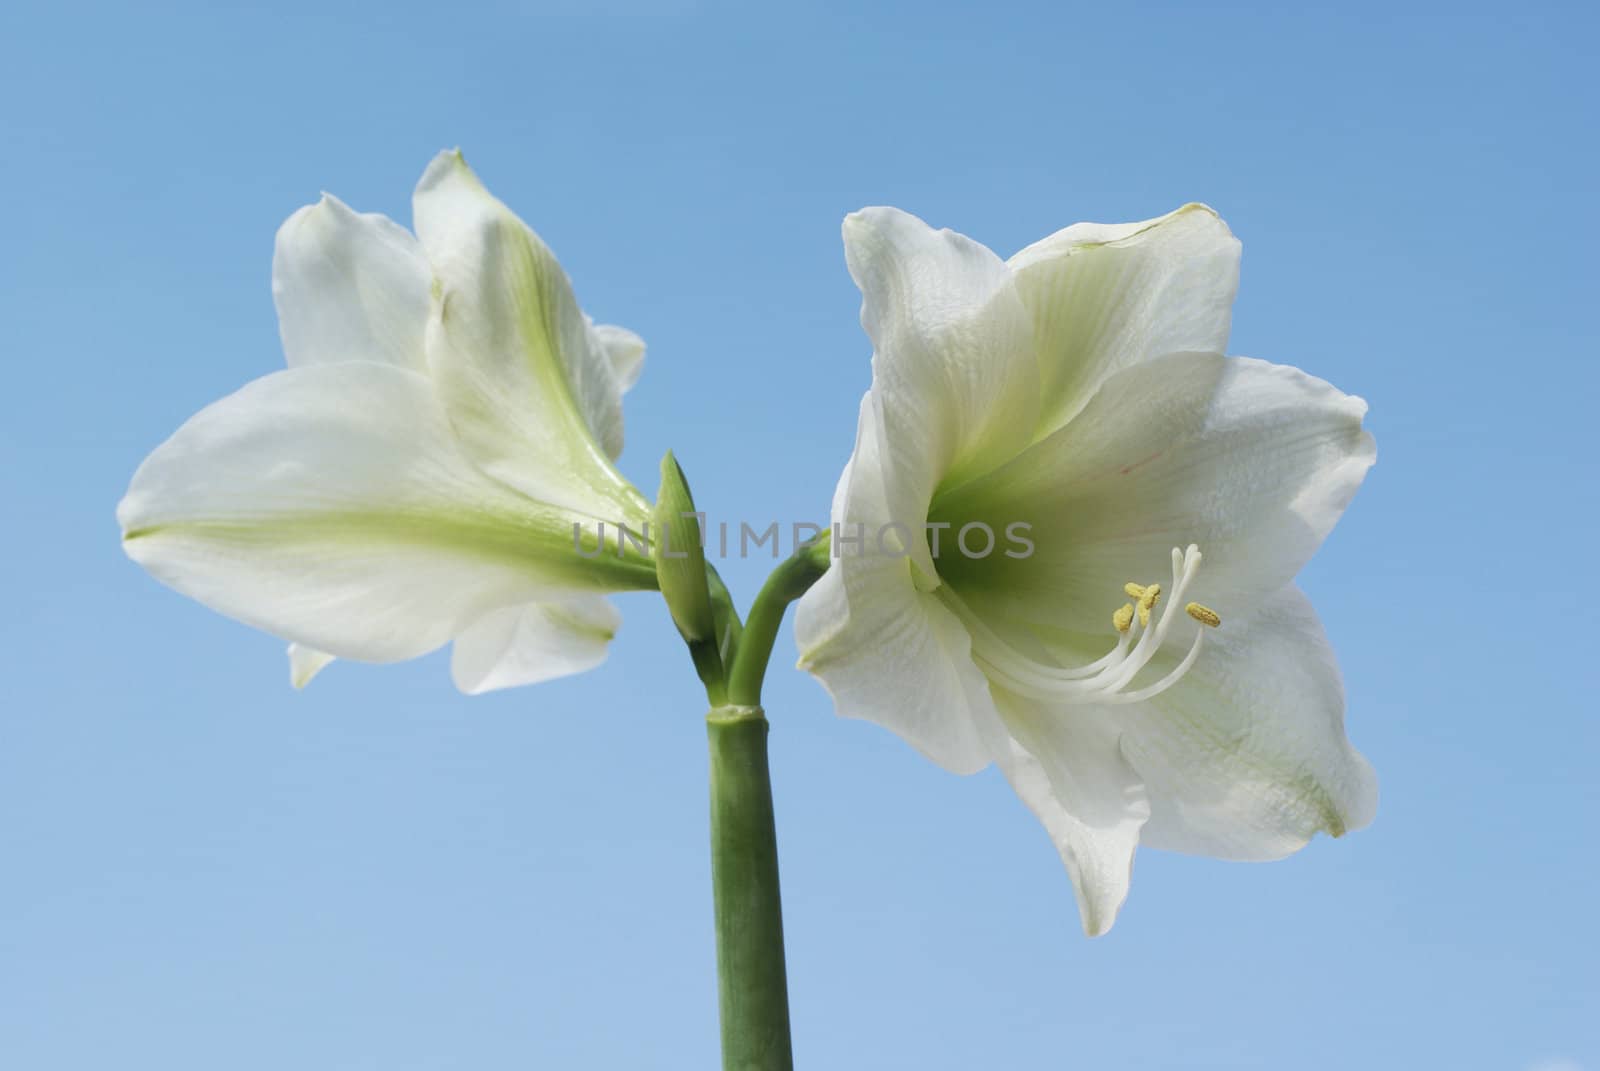 White amaryllis in bloom, on a blue background.